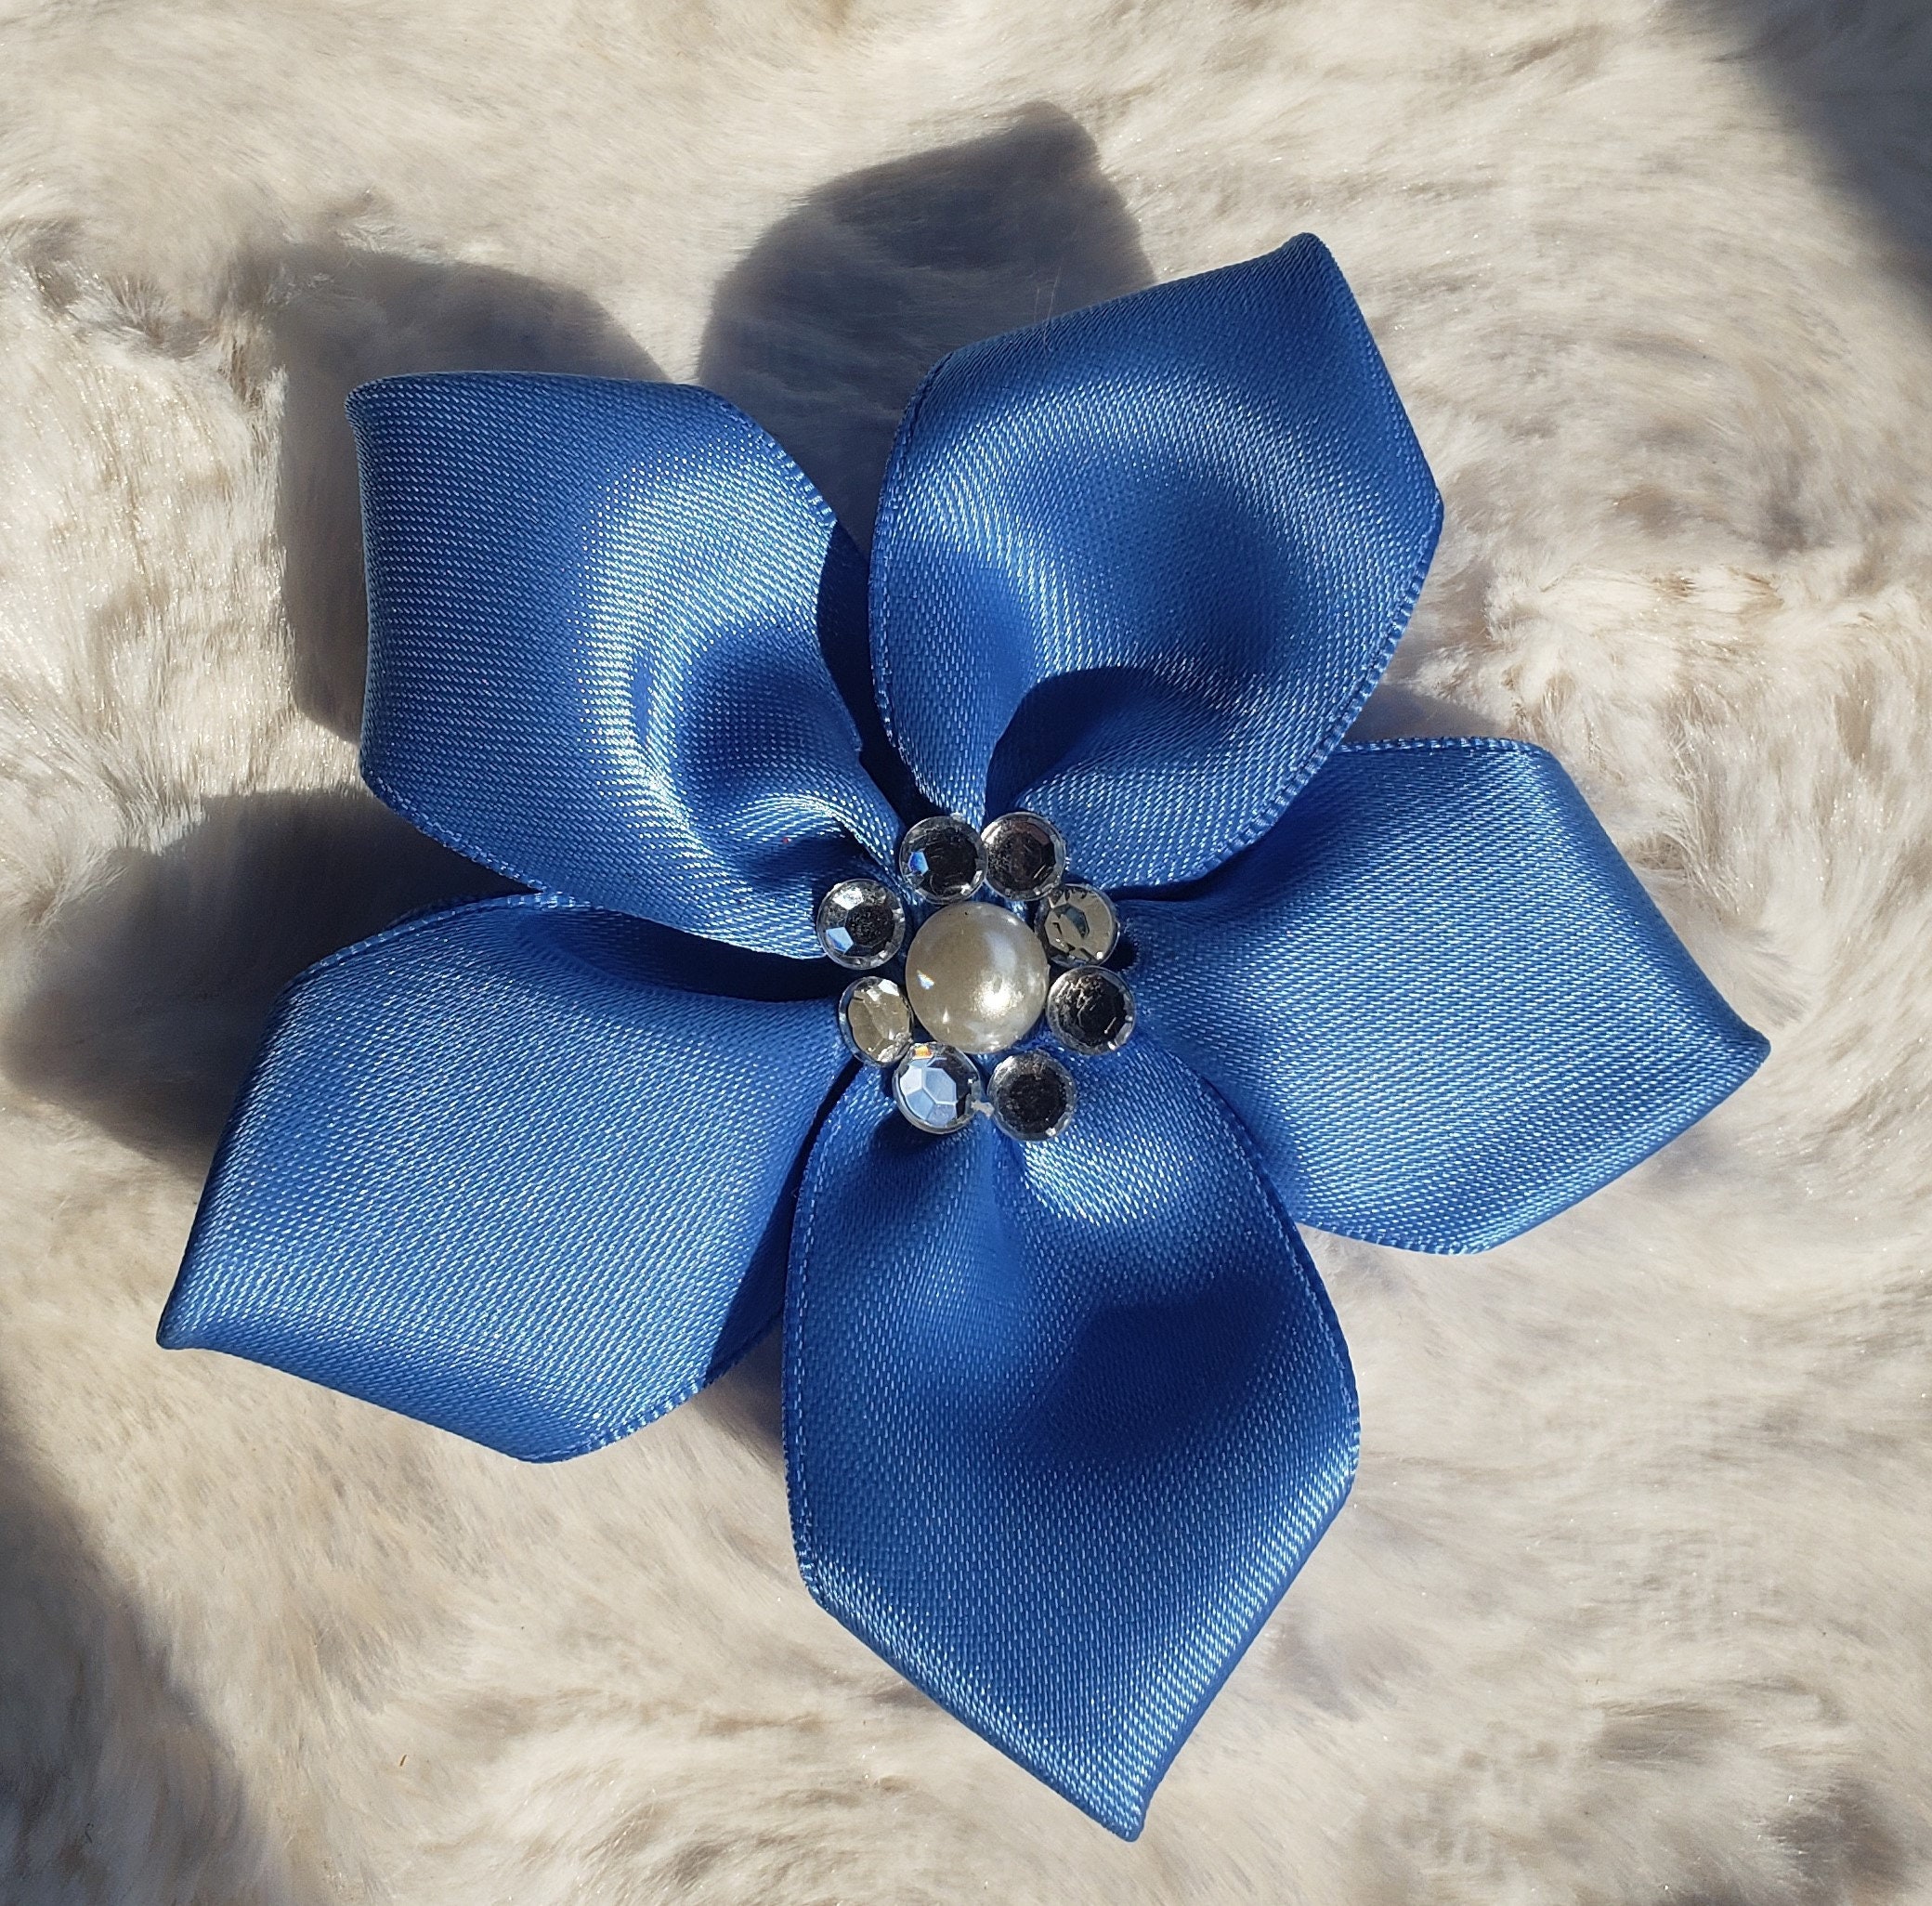 Blue Flower Hair Clip With Rhinestone and Pearl Center - Etsy UK